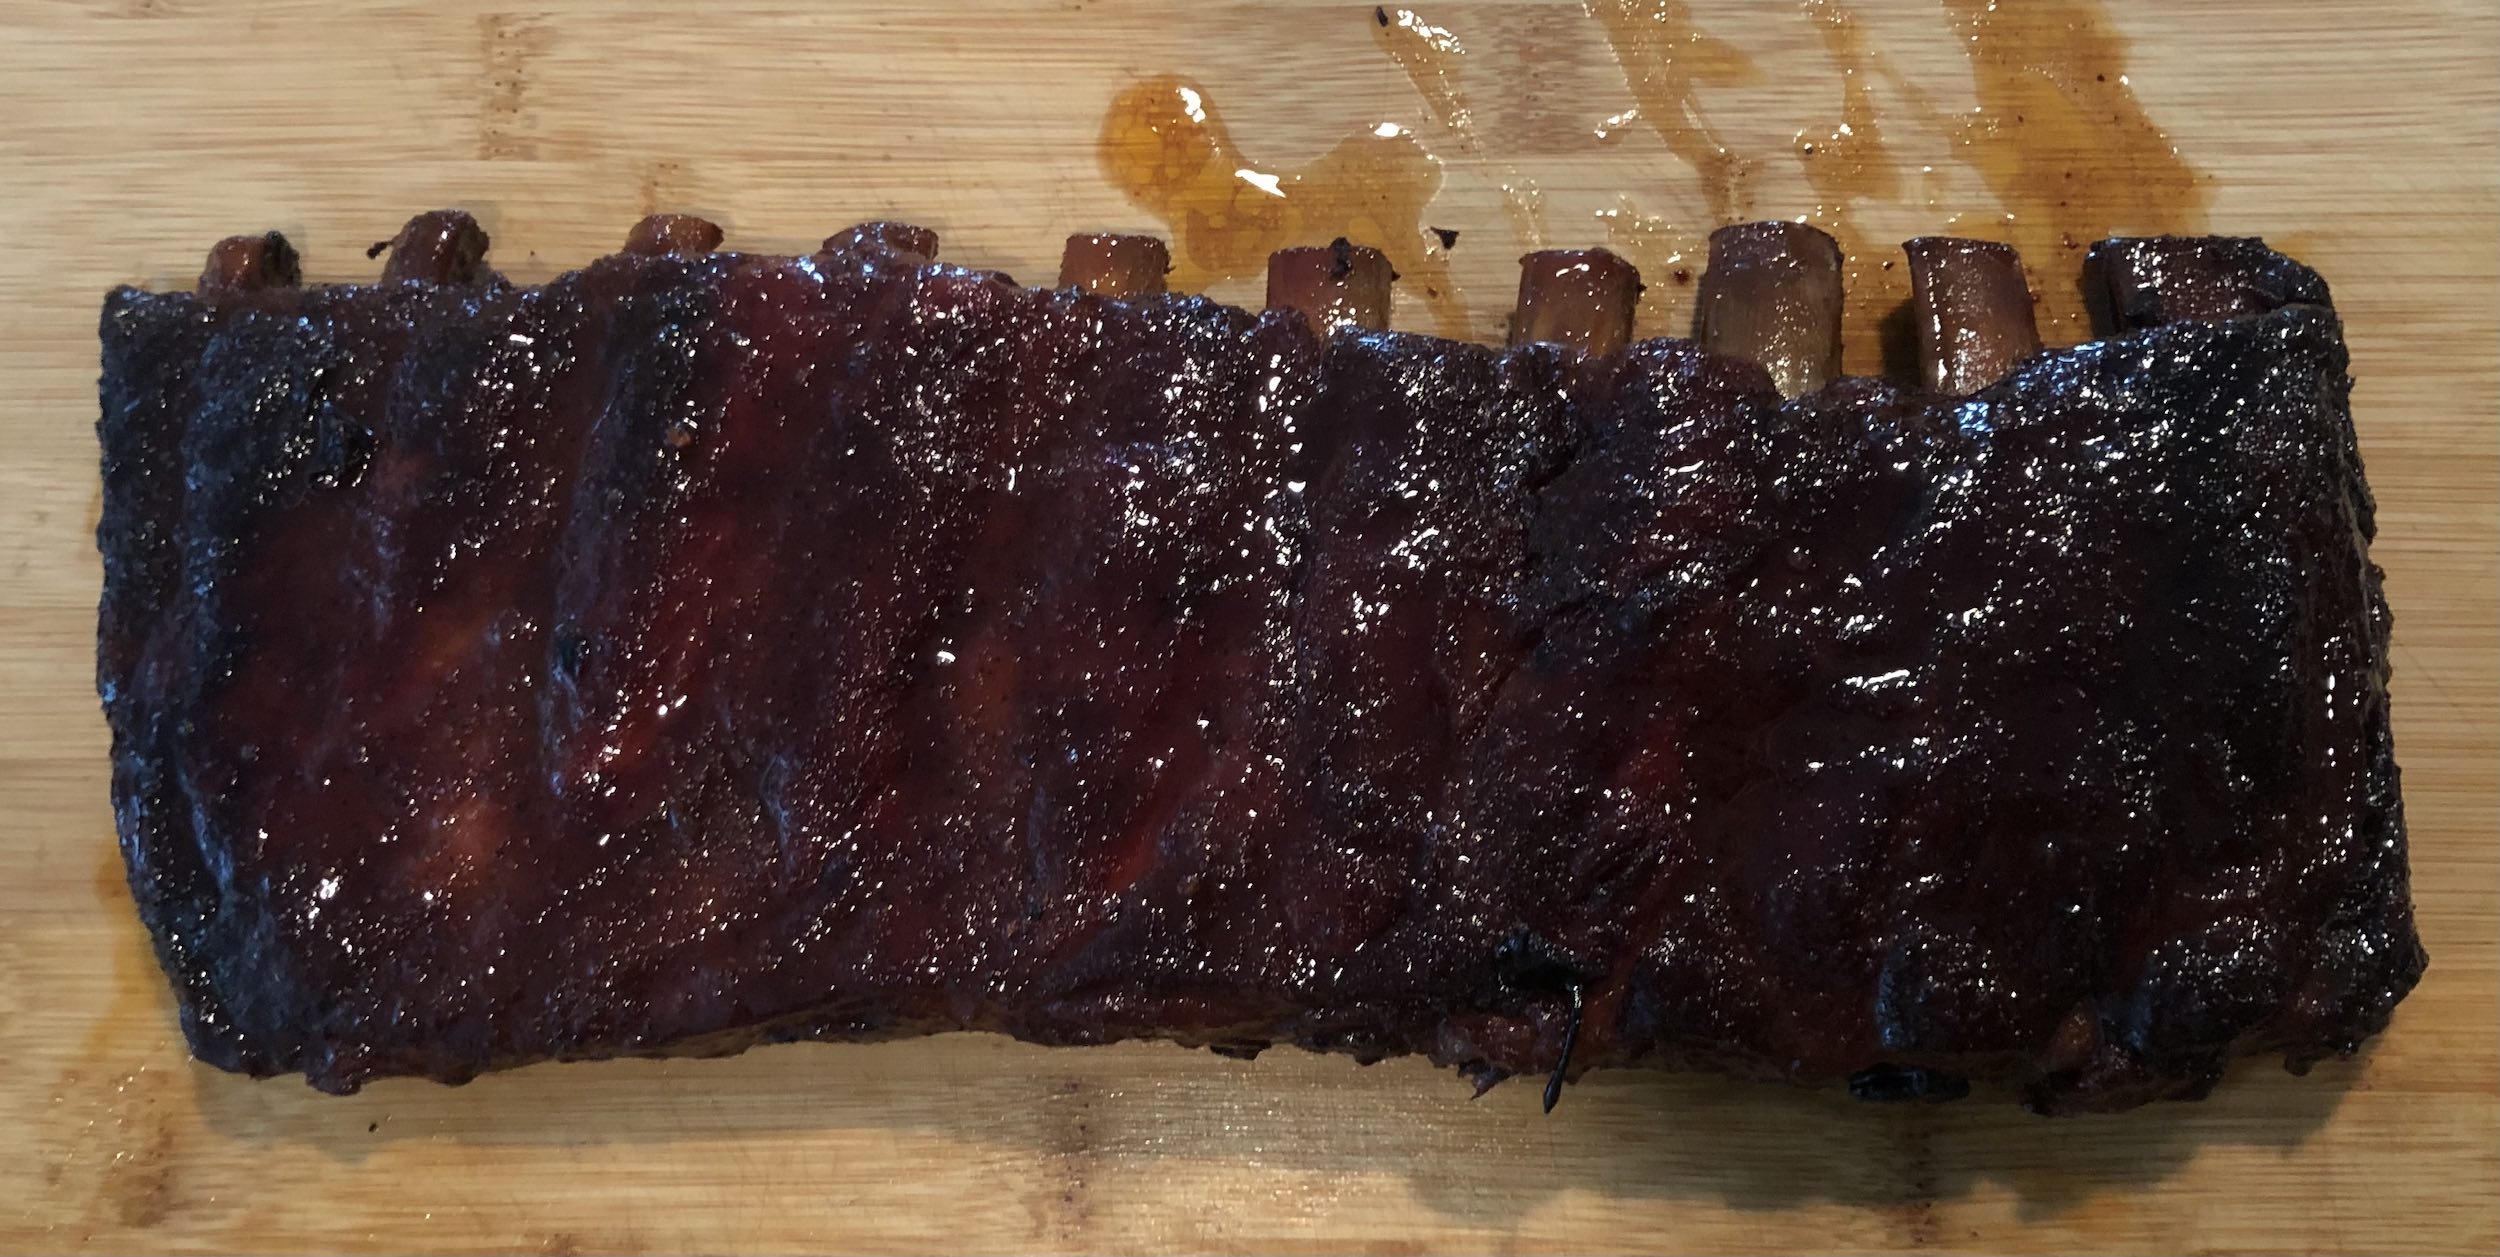 Finished St. Louis style spare ribs